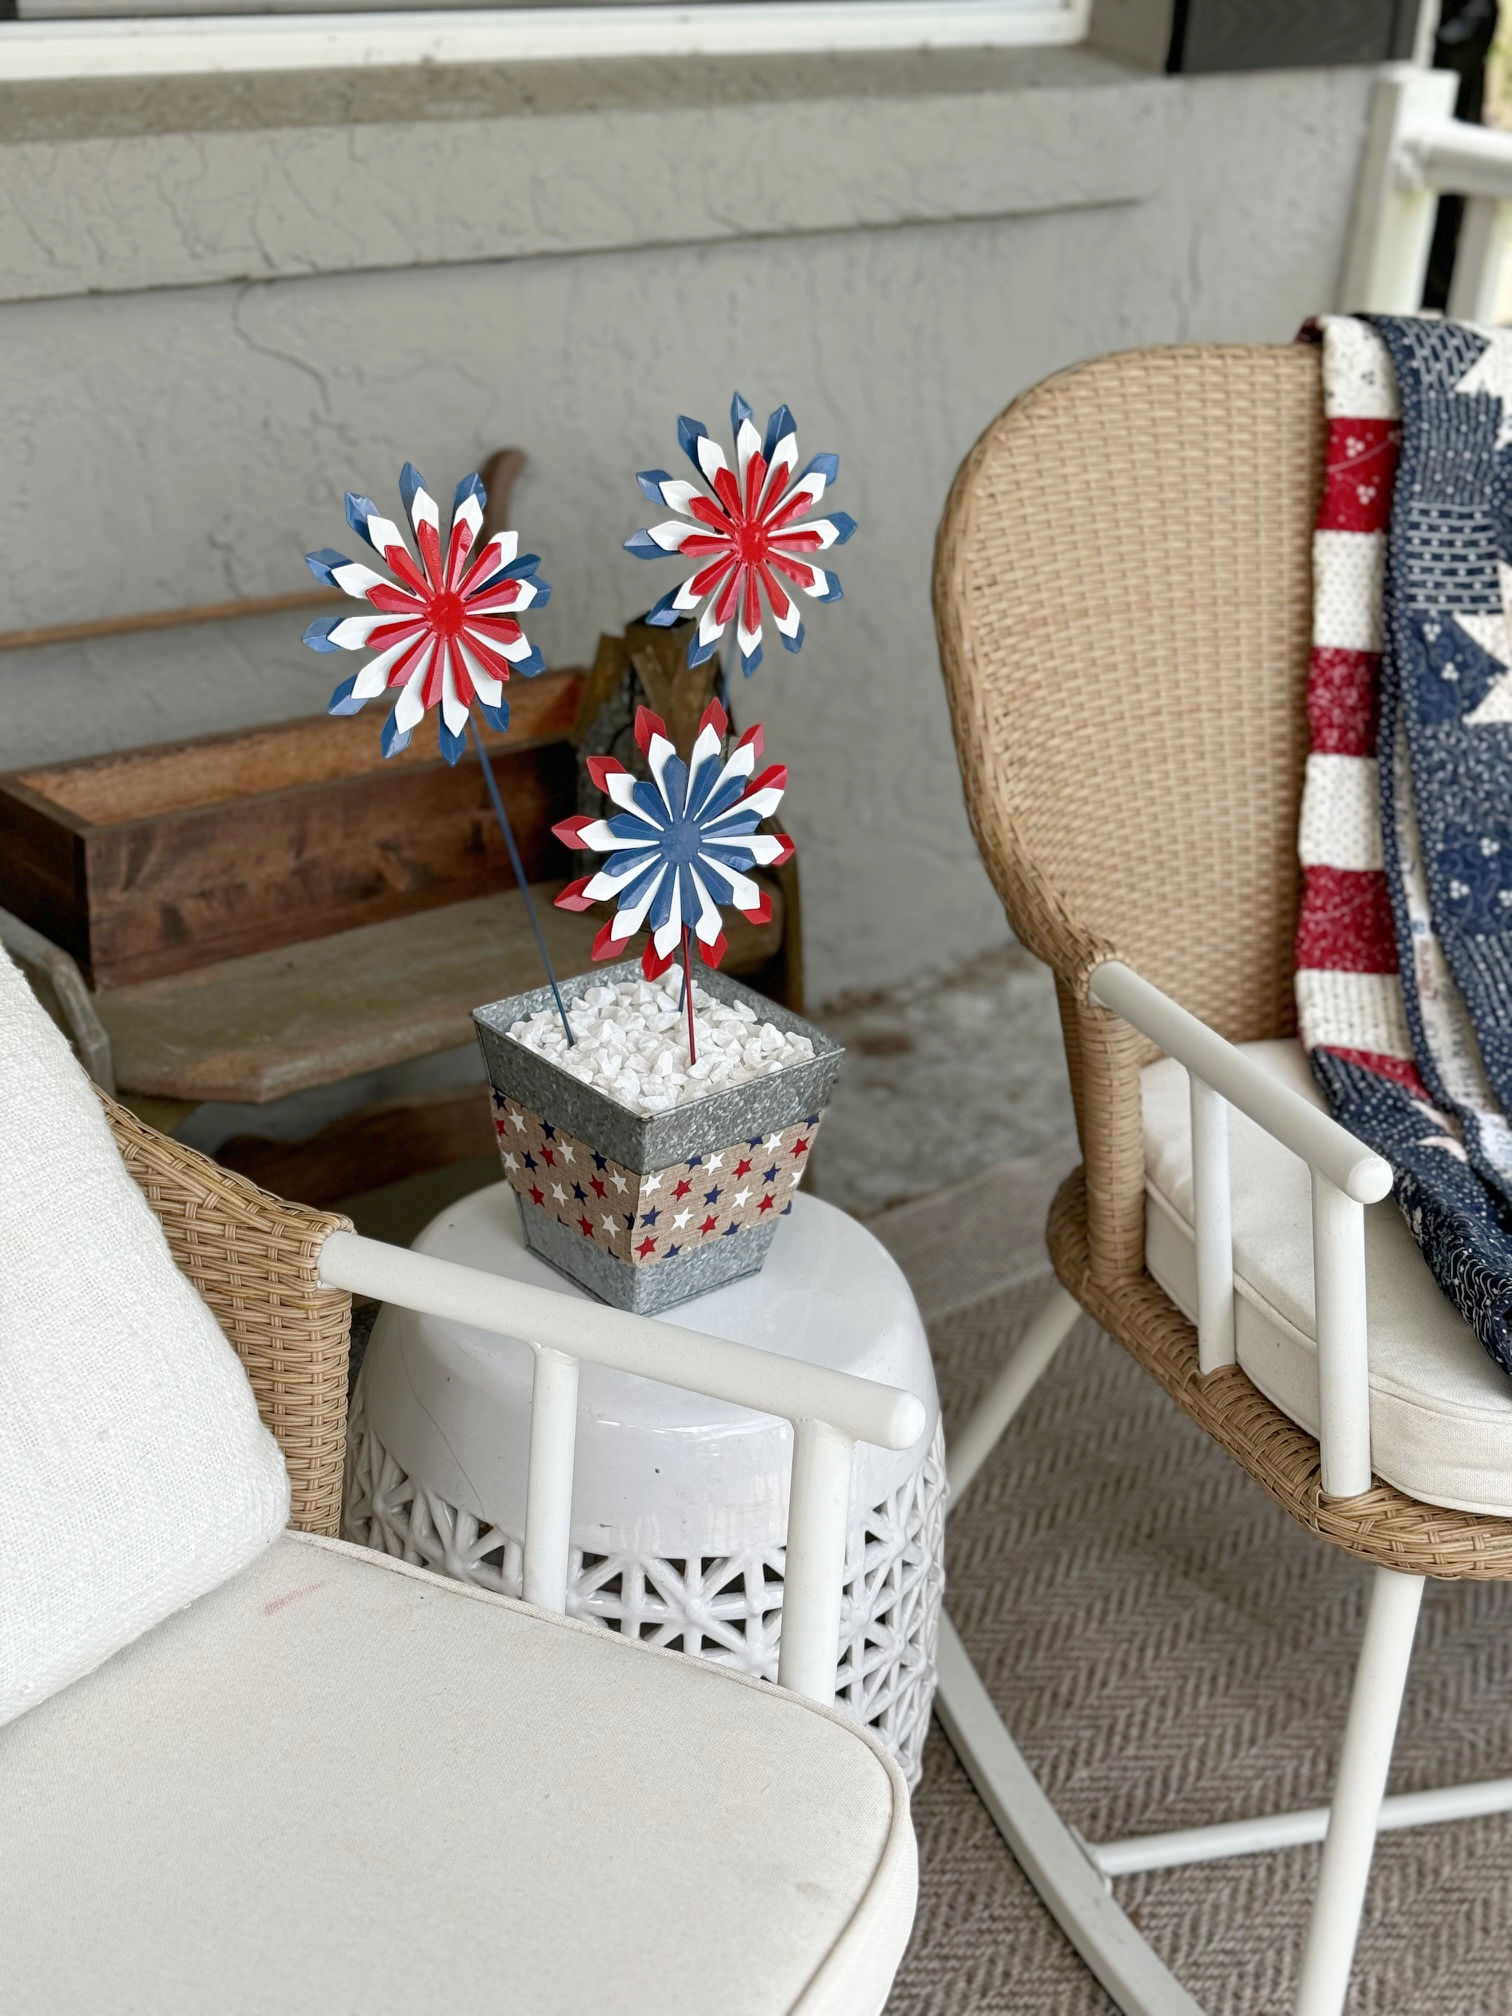 close up of red white and blue firework flowers in a silver vase on a white table, next to rocking chairs